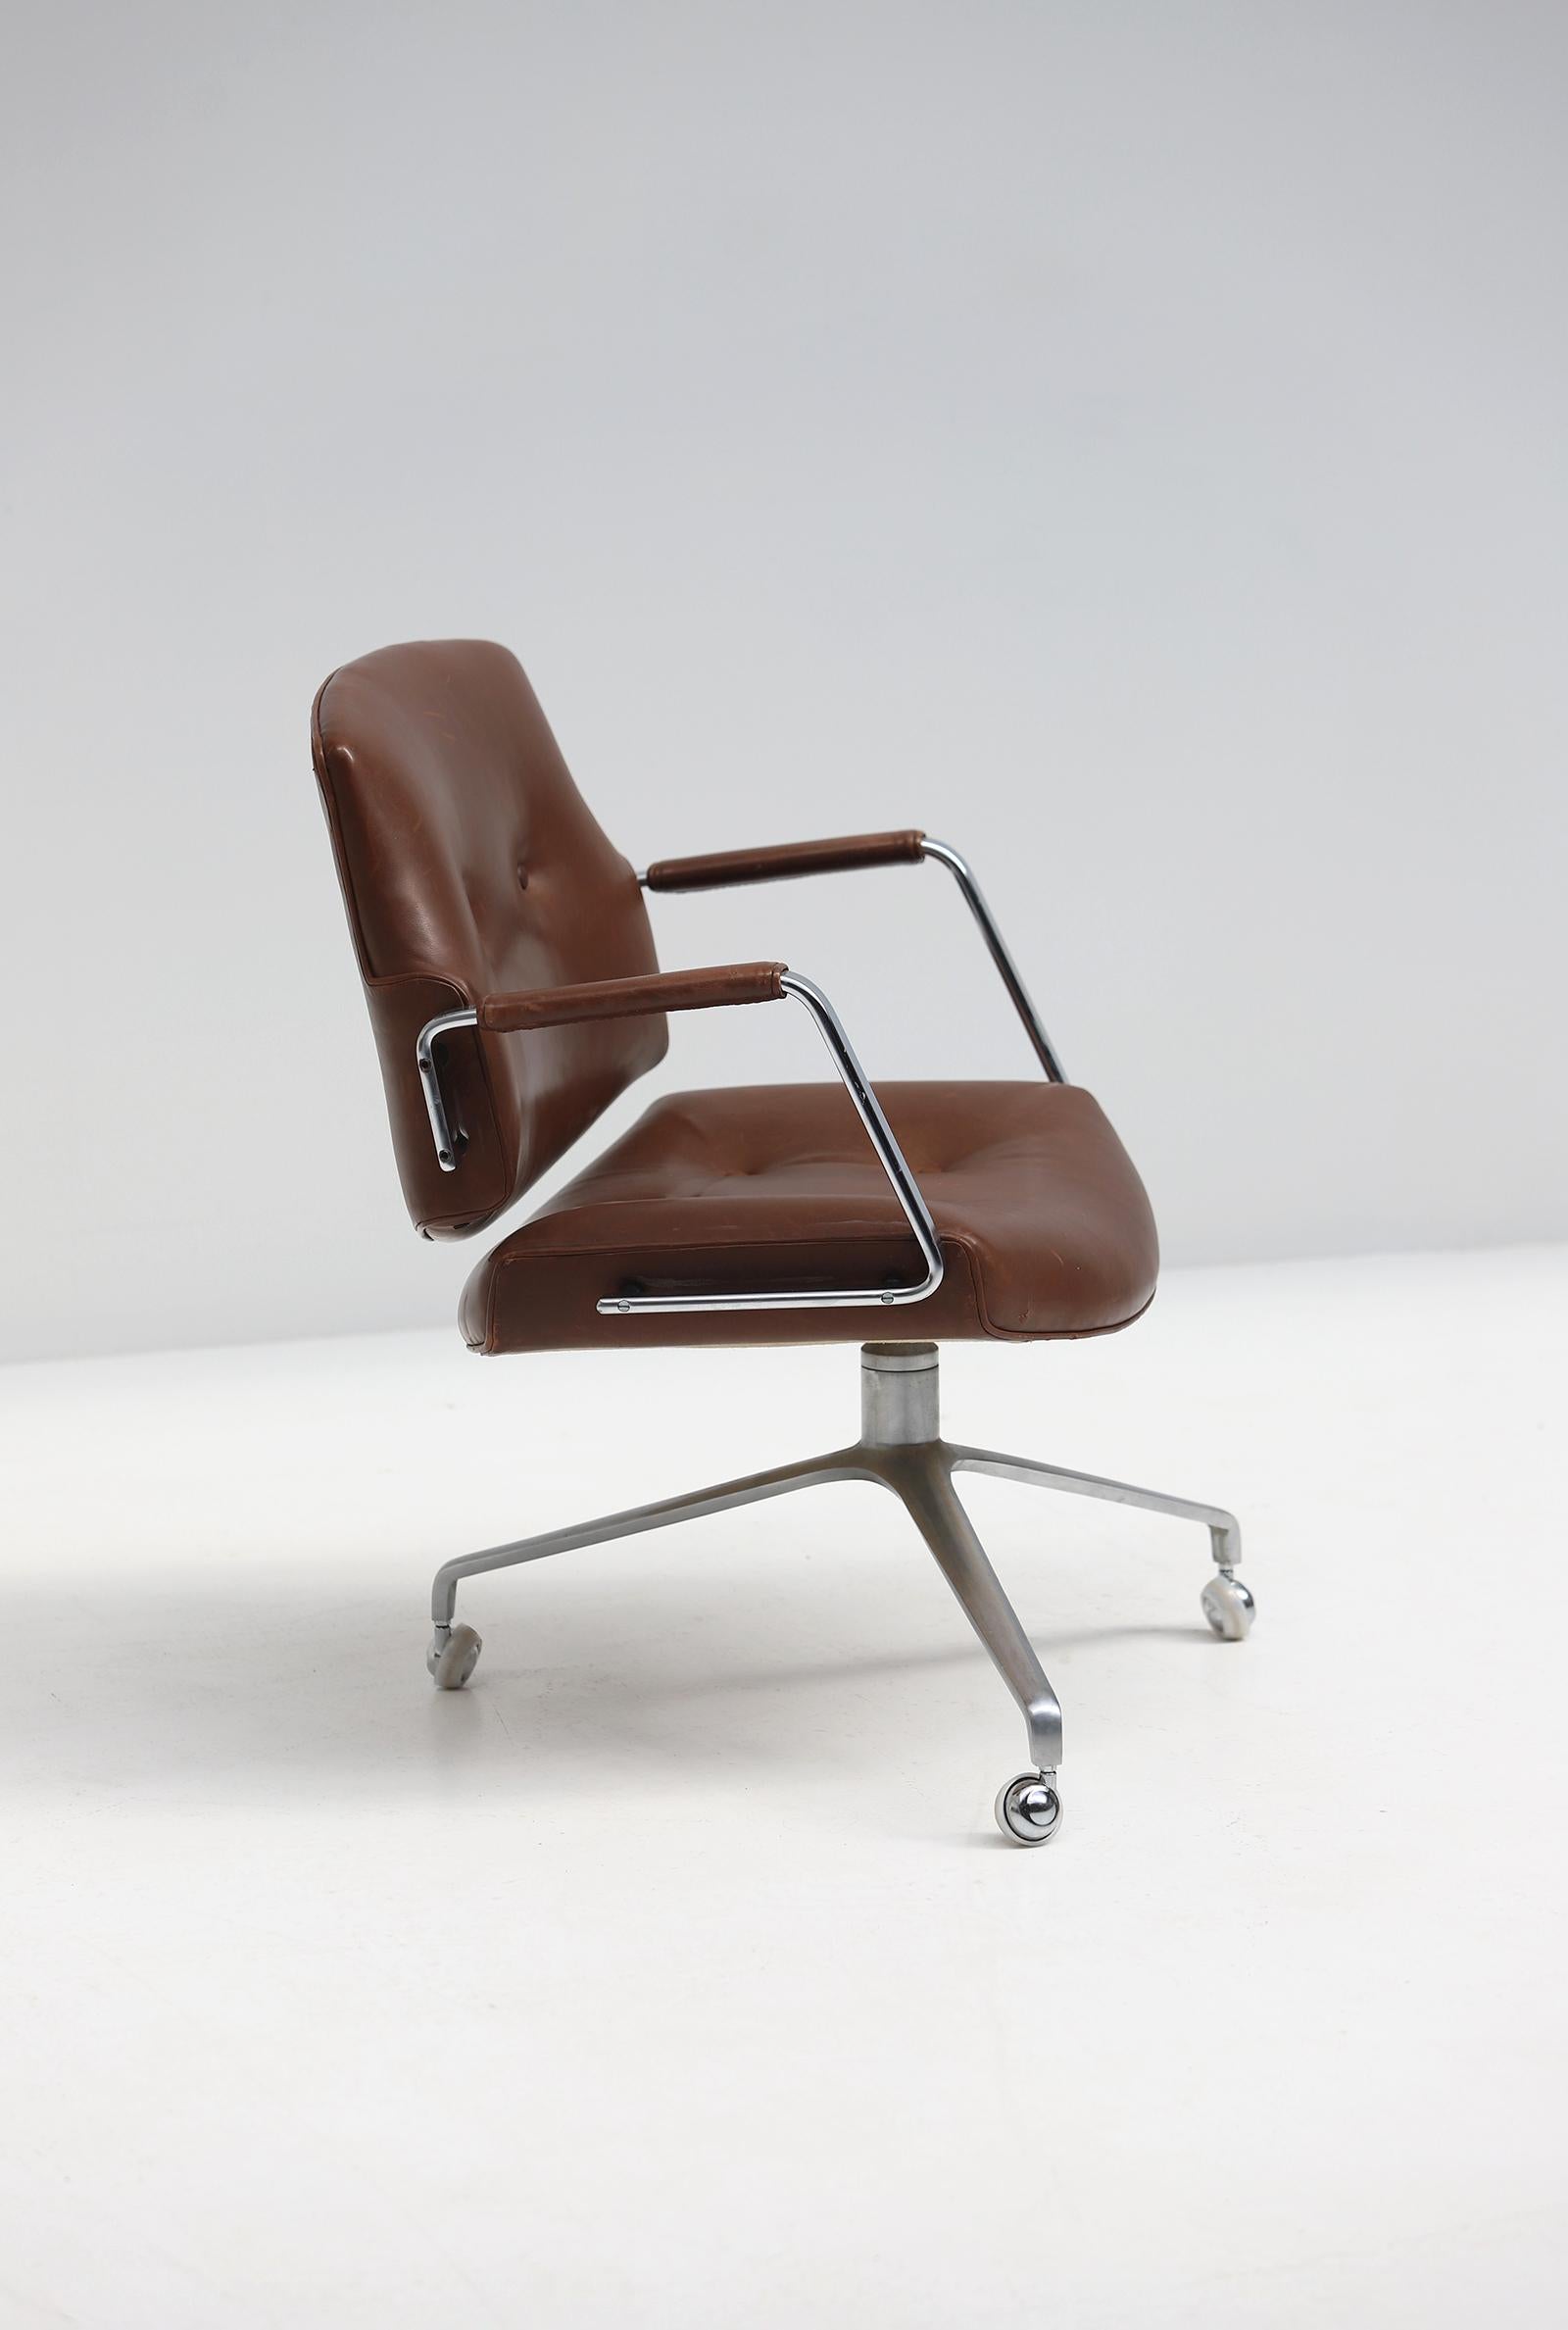 European Fk84 Chocolatebrown Leather Office Chair by Preben Fabricius and Jorgen Kastholm